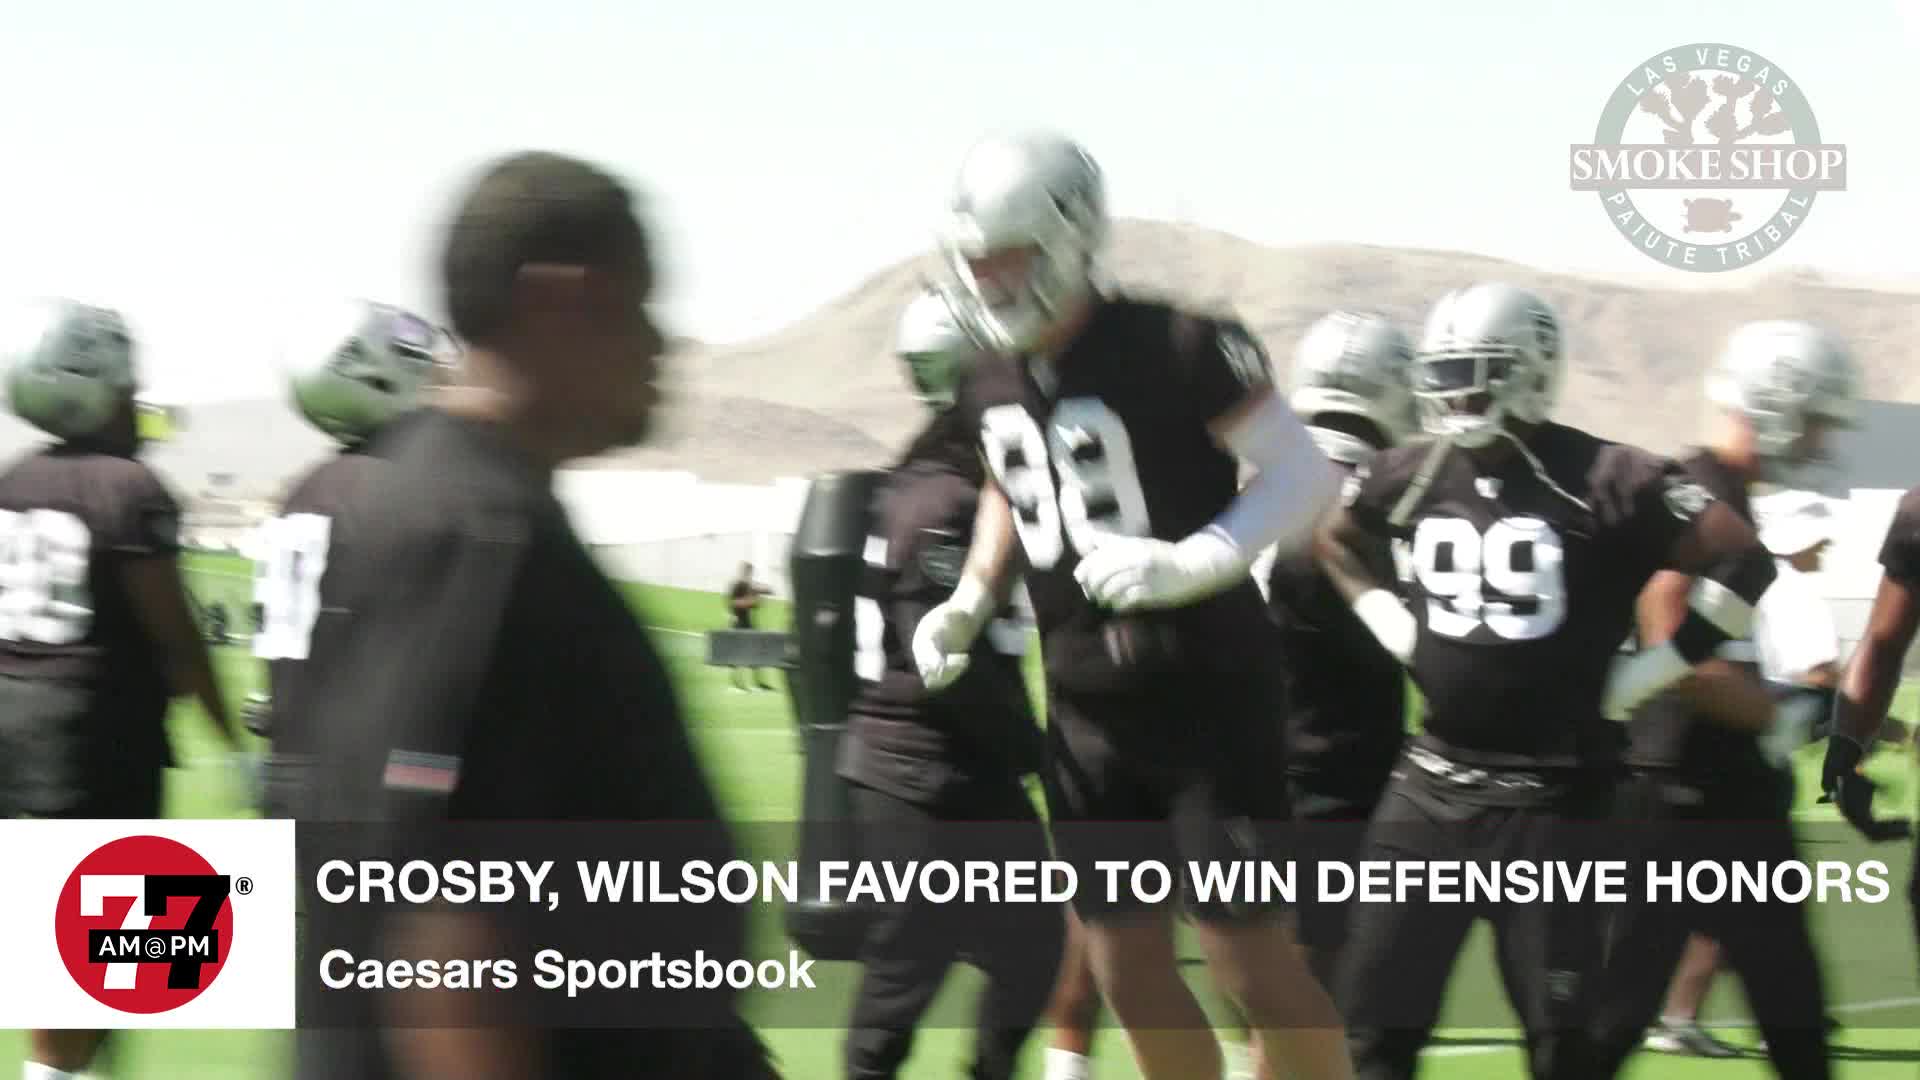 Raiders favored to win defensive awards